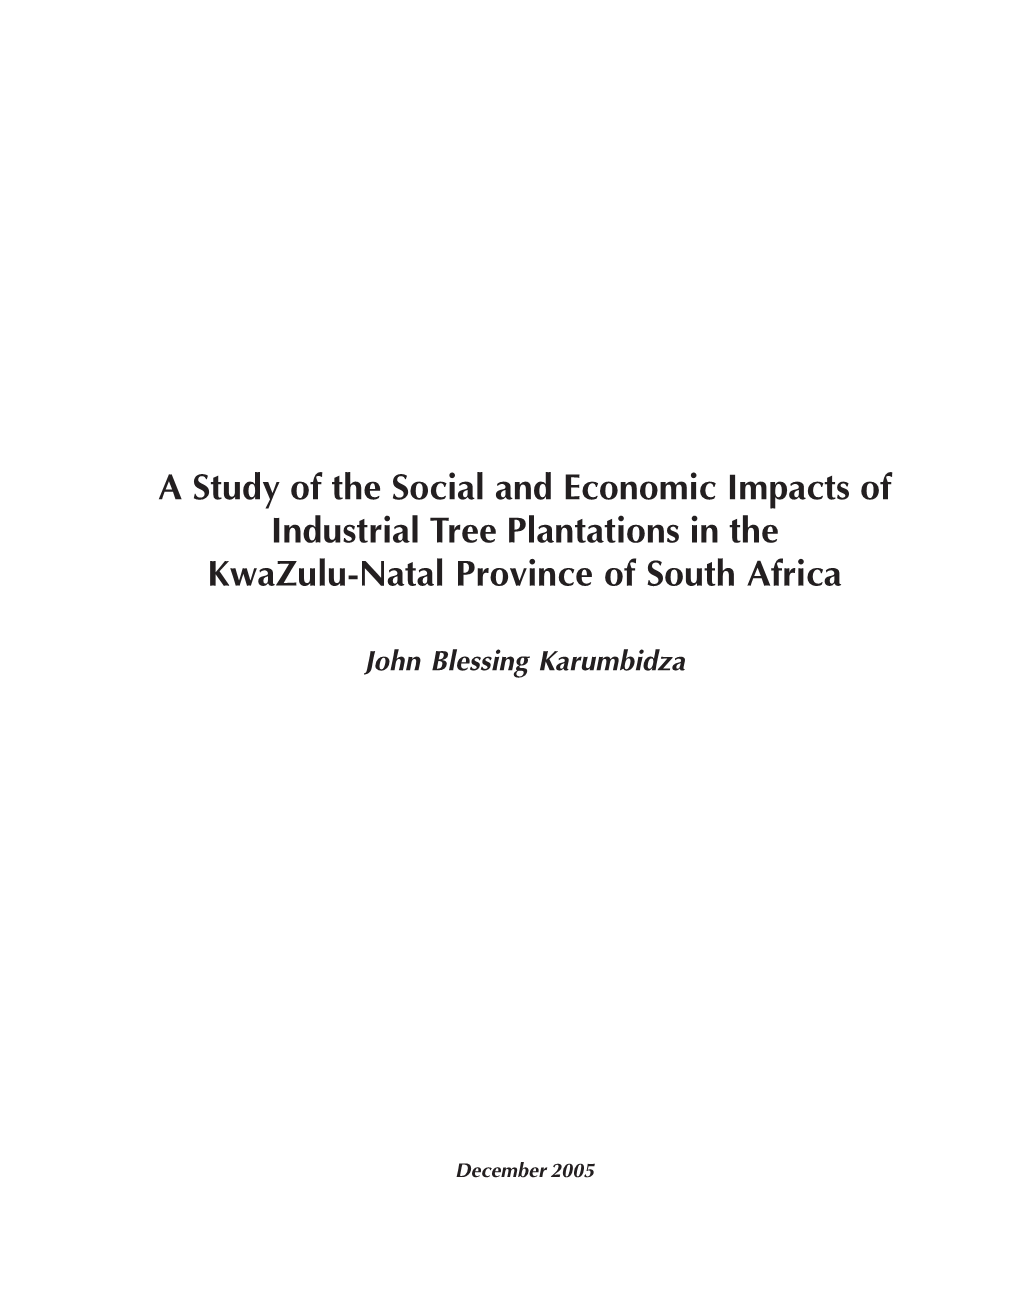 A Study of the Social and Economic Impacts of Industrial Tree Plantations in the Kwazulu-Natal Province of South Africa